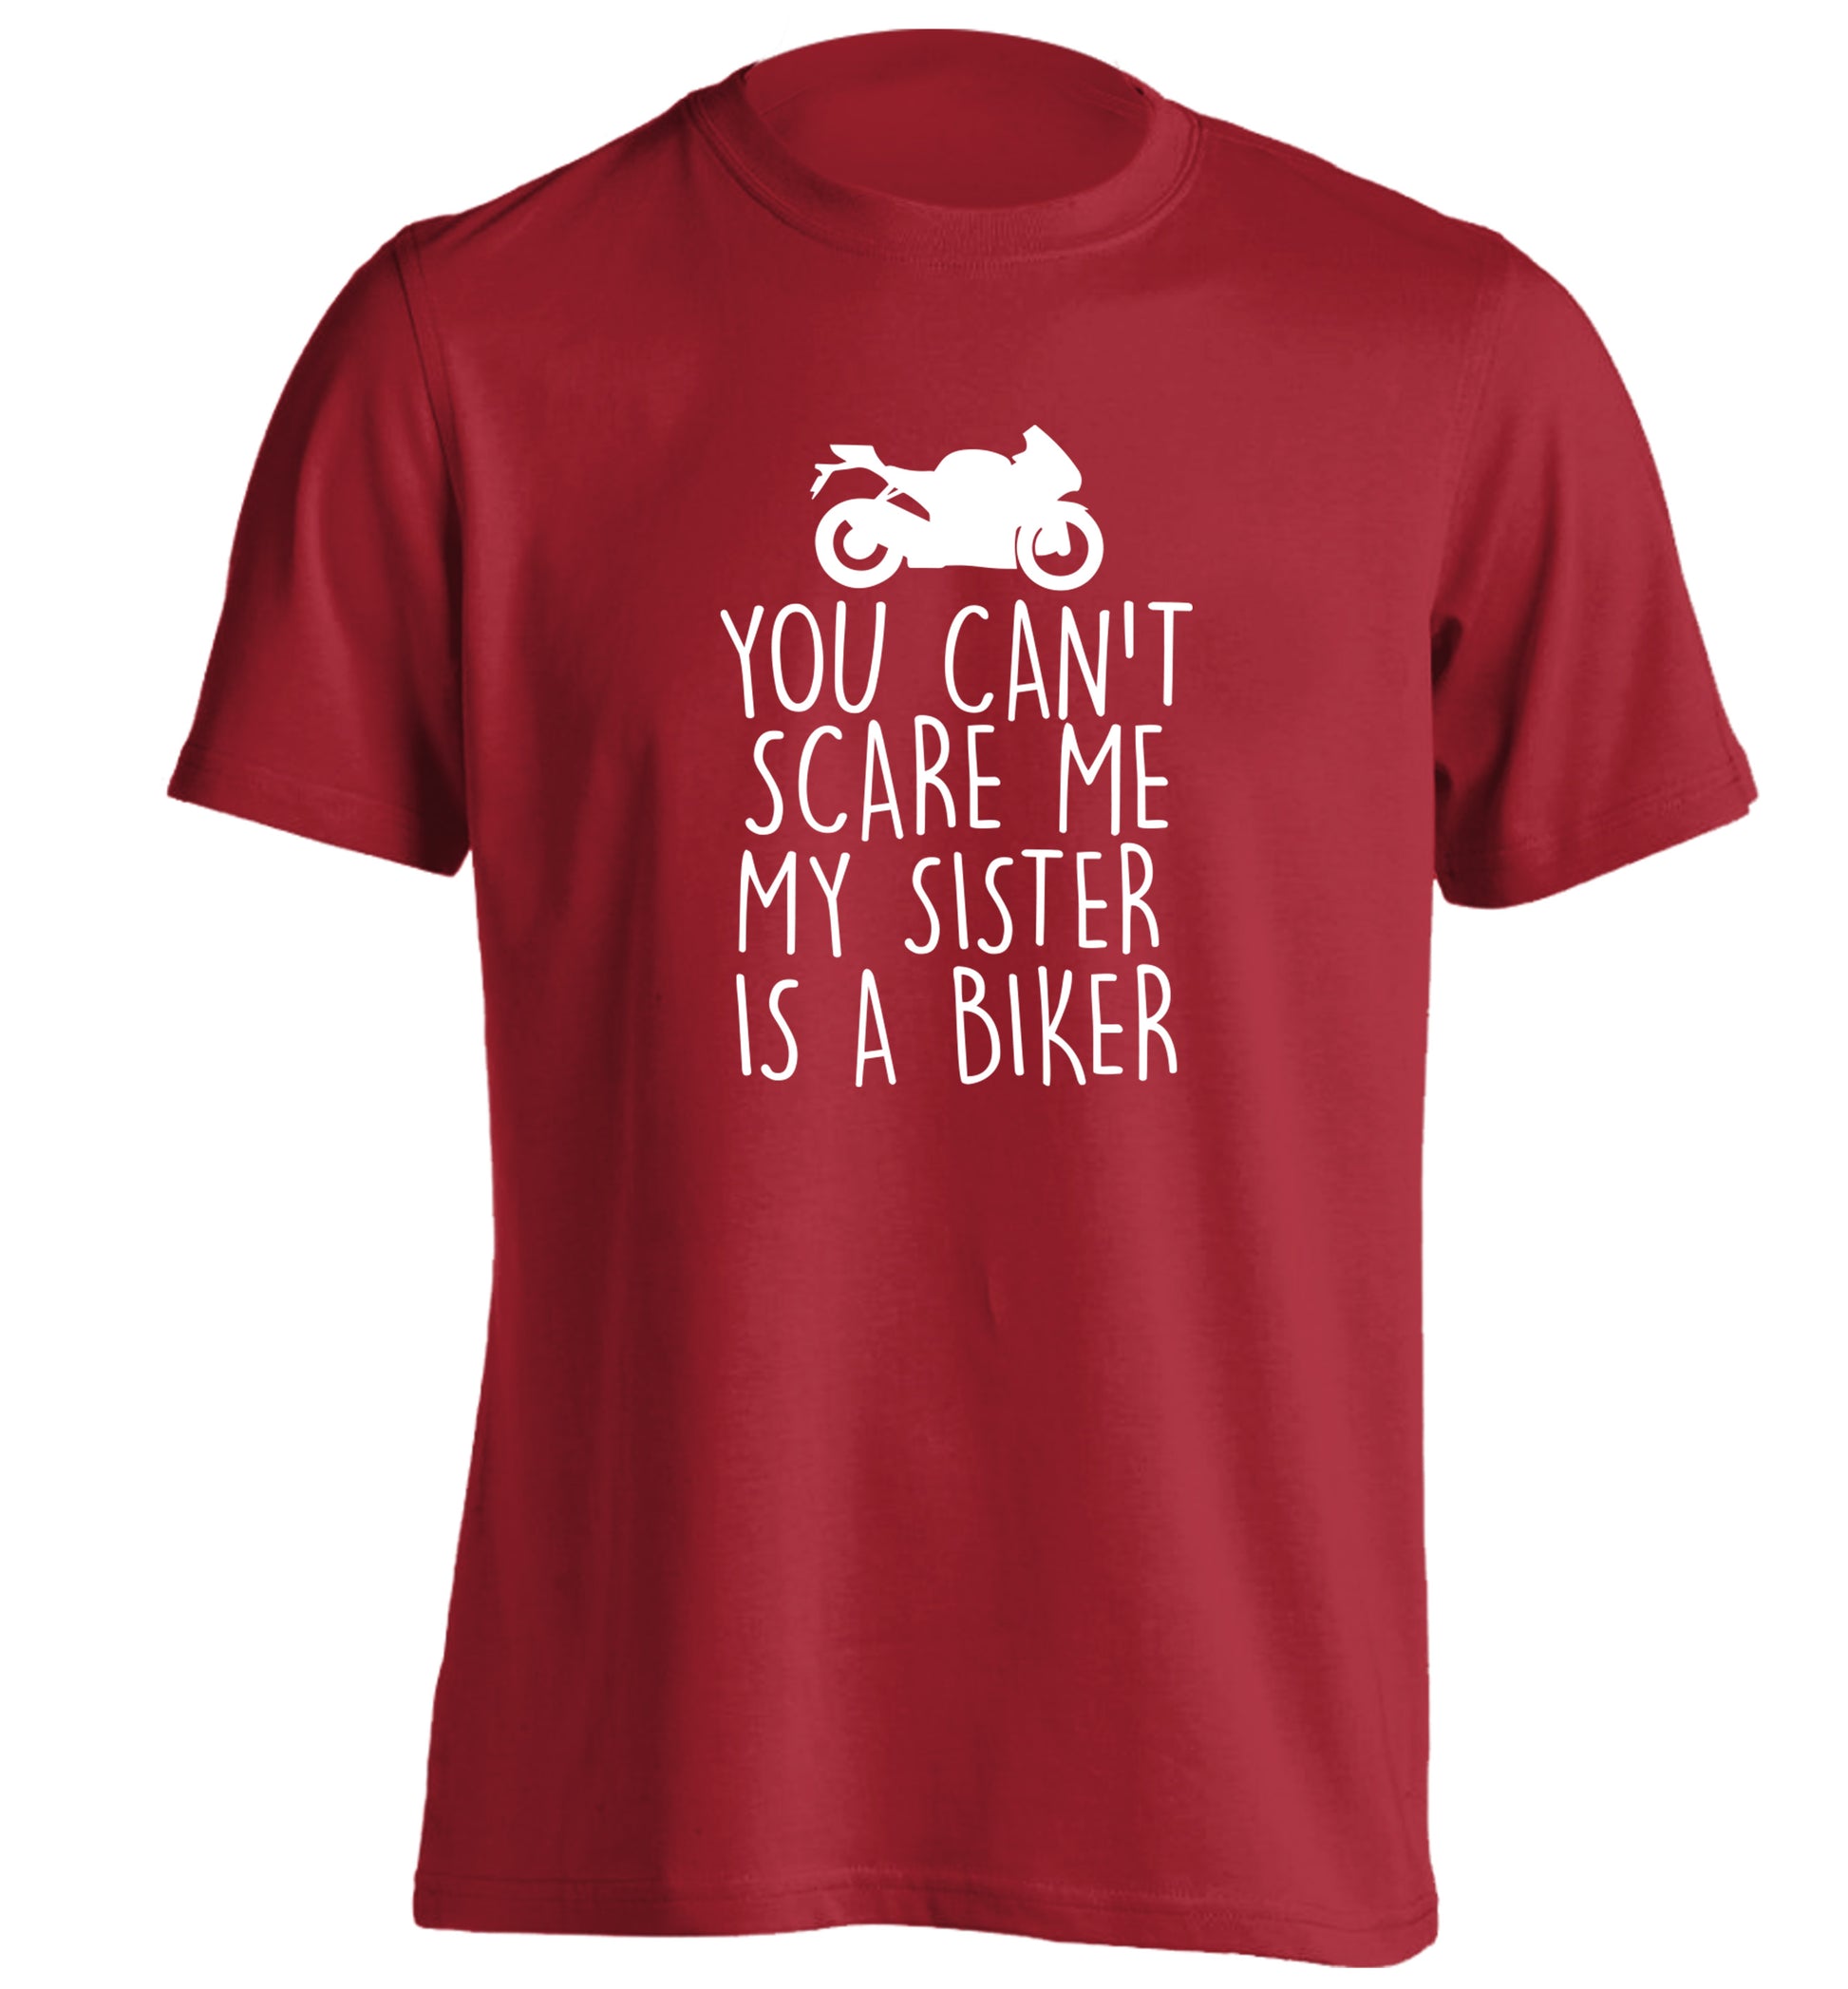 You can't scare me my sister is a biker adults unisex red Tshirt 2XL